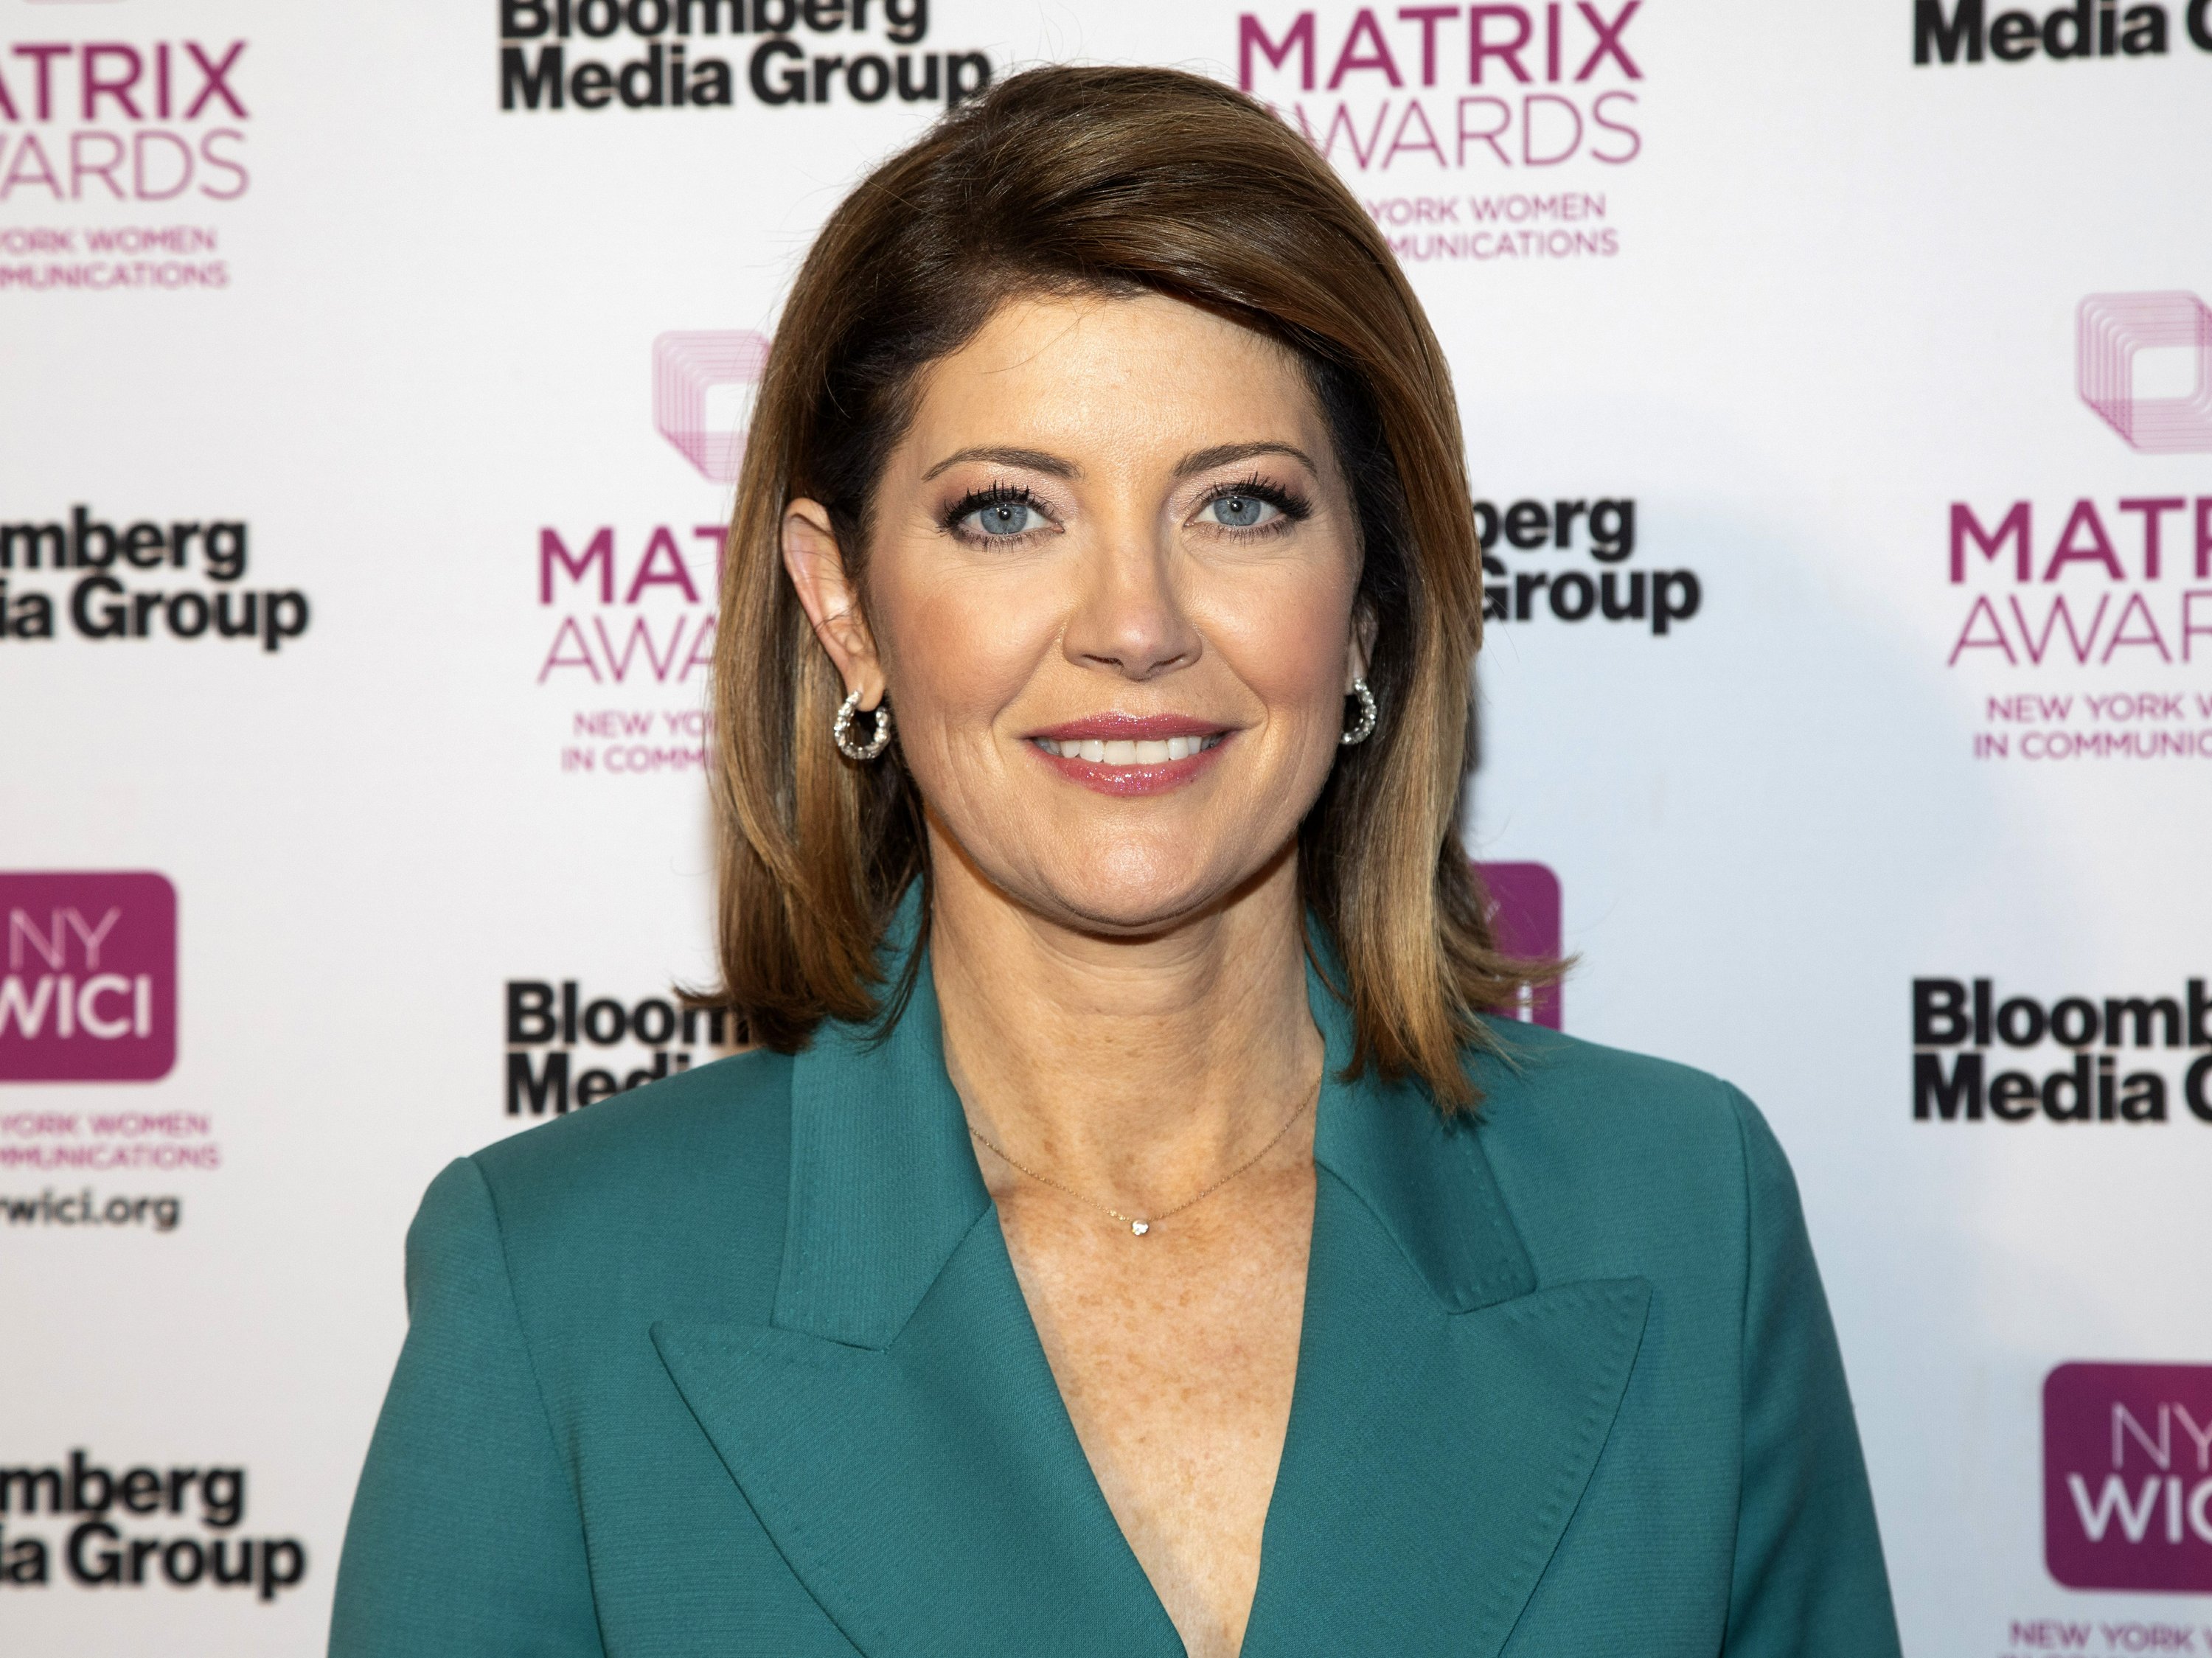 CBS News takes some chances with new anchor, Norah O'Donnell AP News